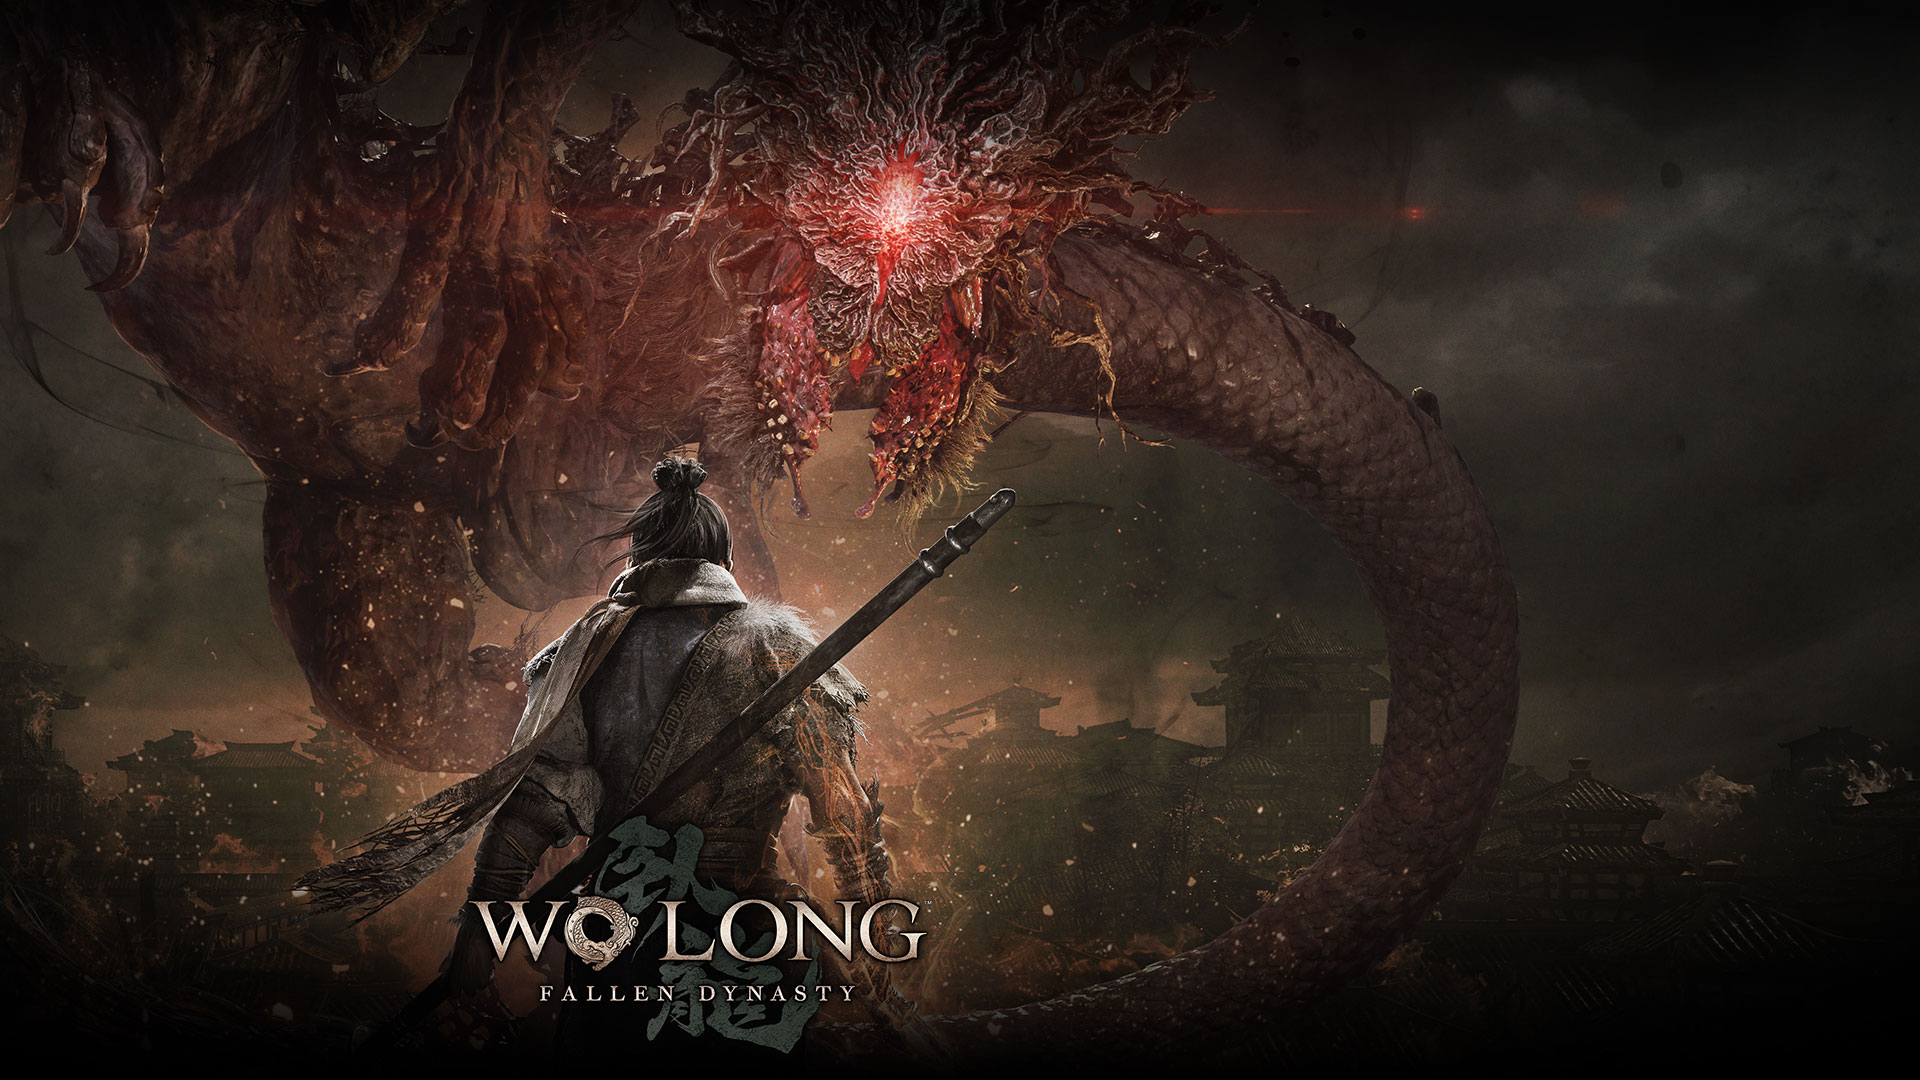 The number of players in Wo Long: Fallen Dynasty has crossed the 5 million mark